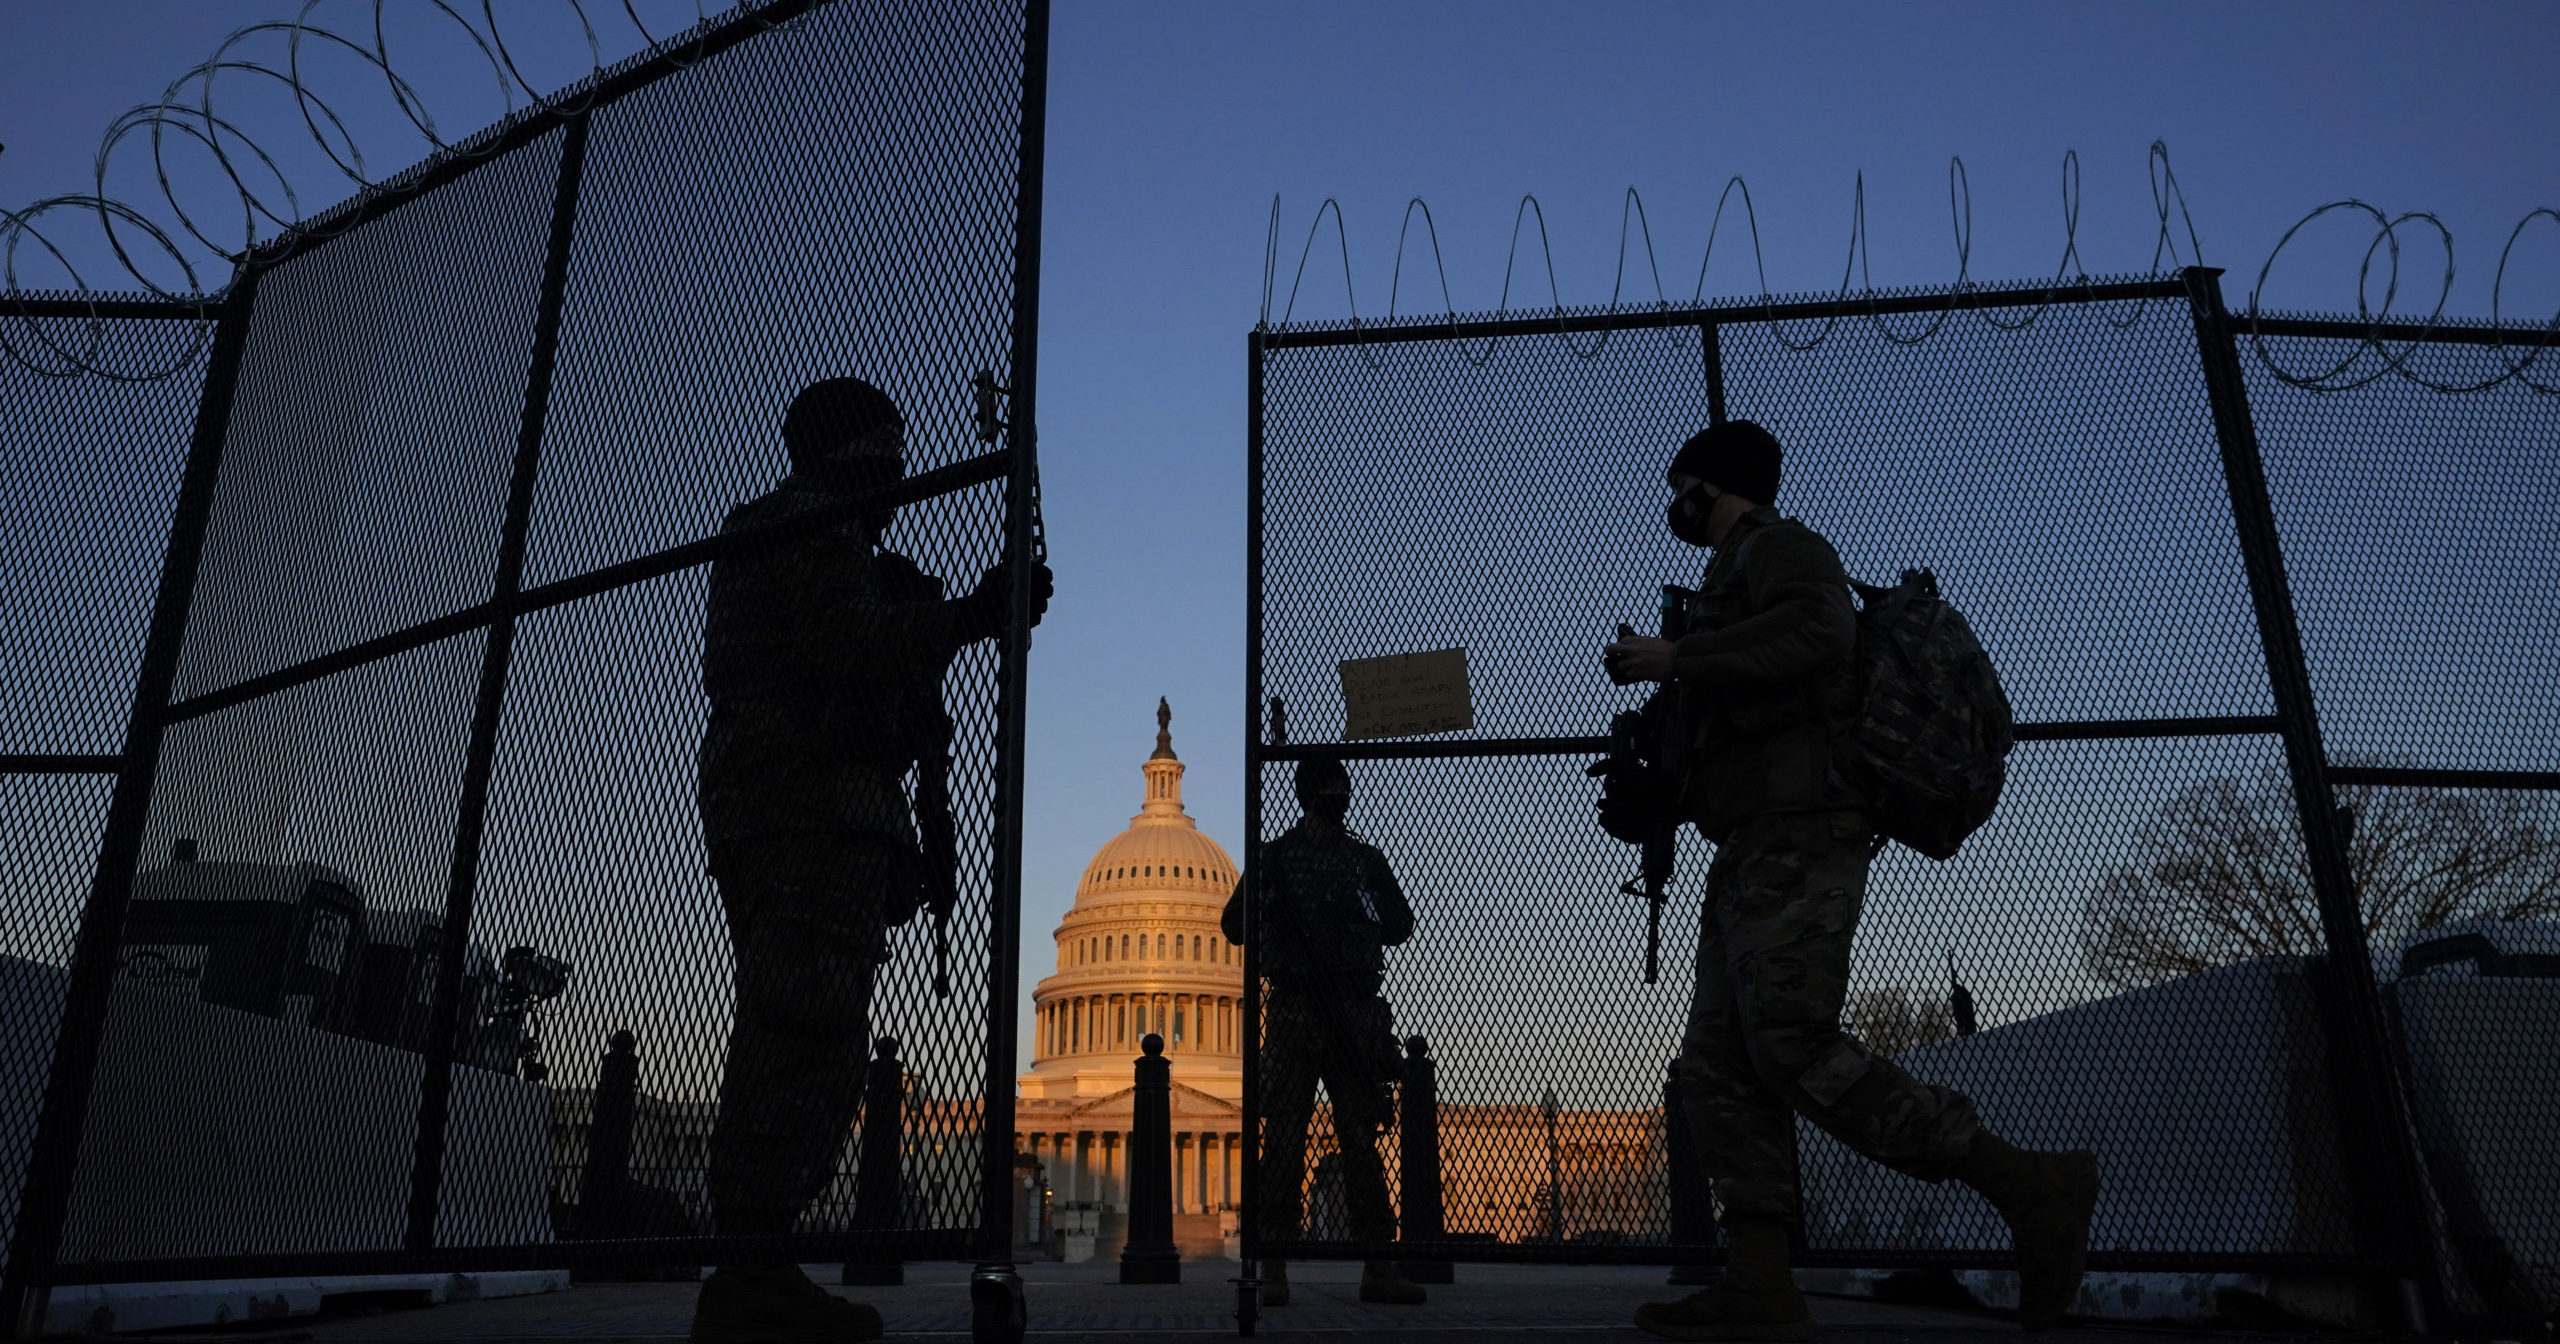 National Guard soldiers open a gate of the razor wire-topped perimeter fence around the Capitol to allow a colleague in at sunrise in Washington on March 8, 2021.